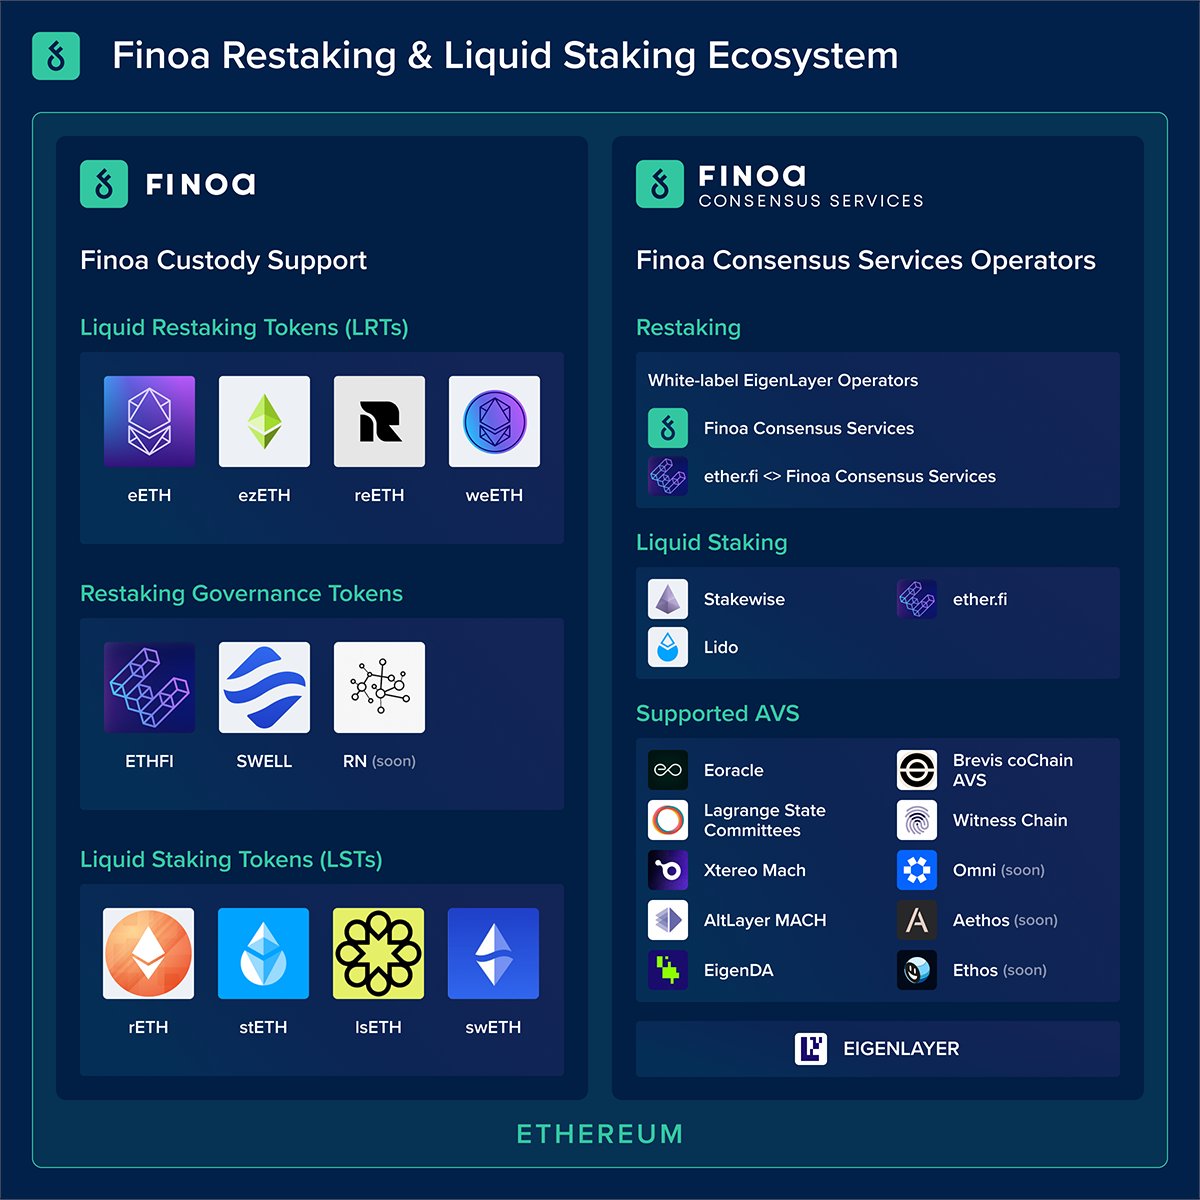 We're thrilled to share our journey in Ethereum staking & vibrant ecosystem! Below is a snapshot of our current involvement with restaking and liquid staking, spanning across both Finoa and Finoa Consensus Services 🧵⬇️